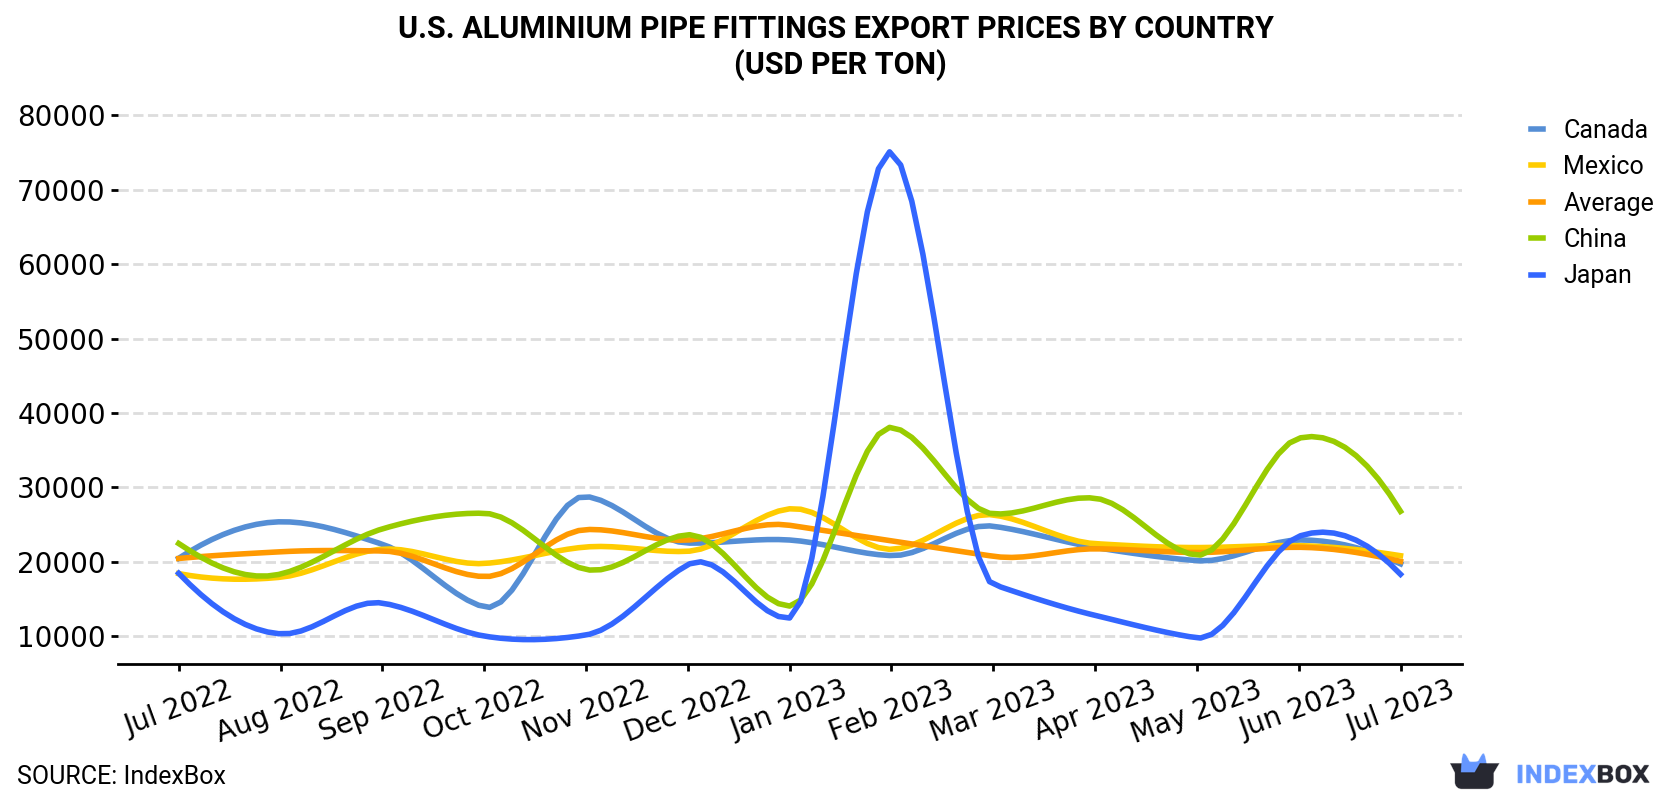 U.S. Aluminium Pipe Fittings Export Prices By Country (USD Per Ton)